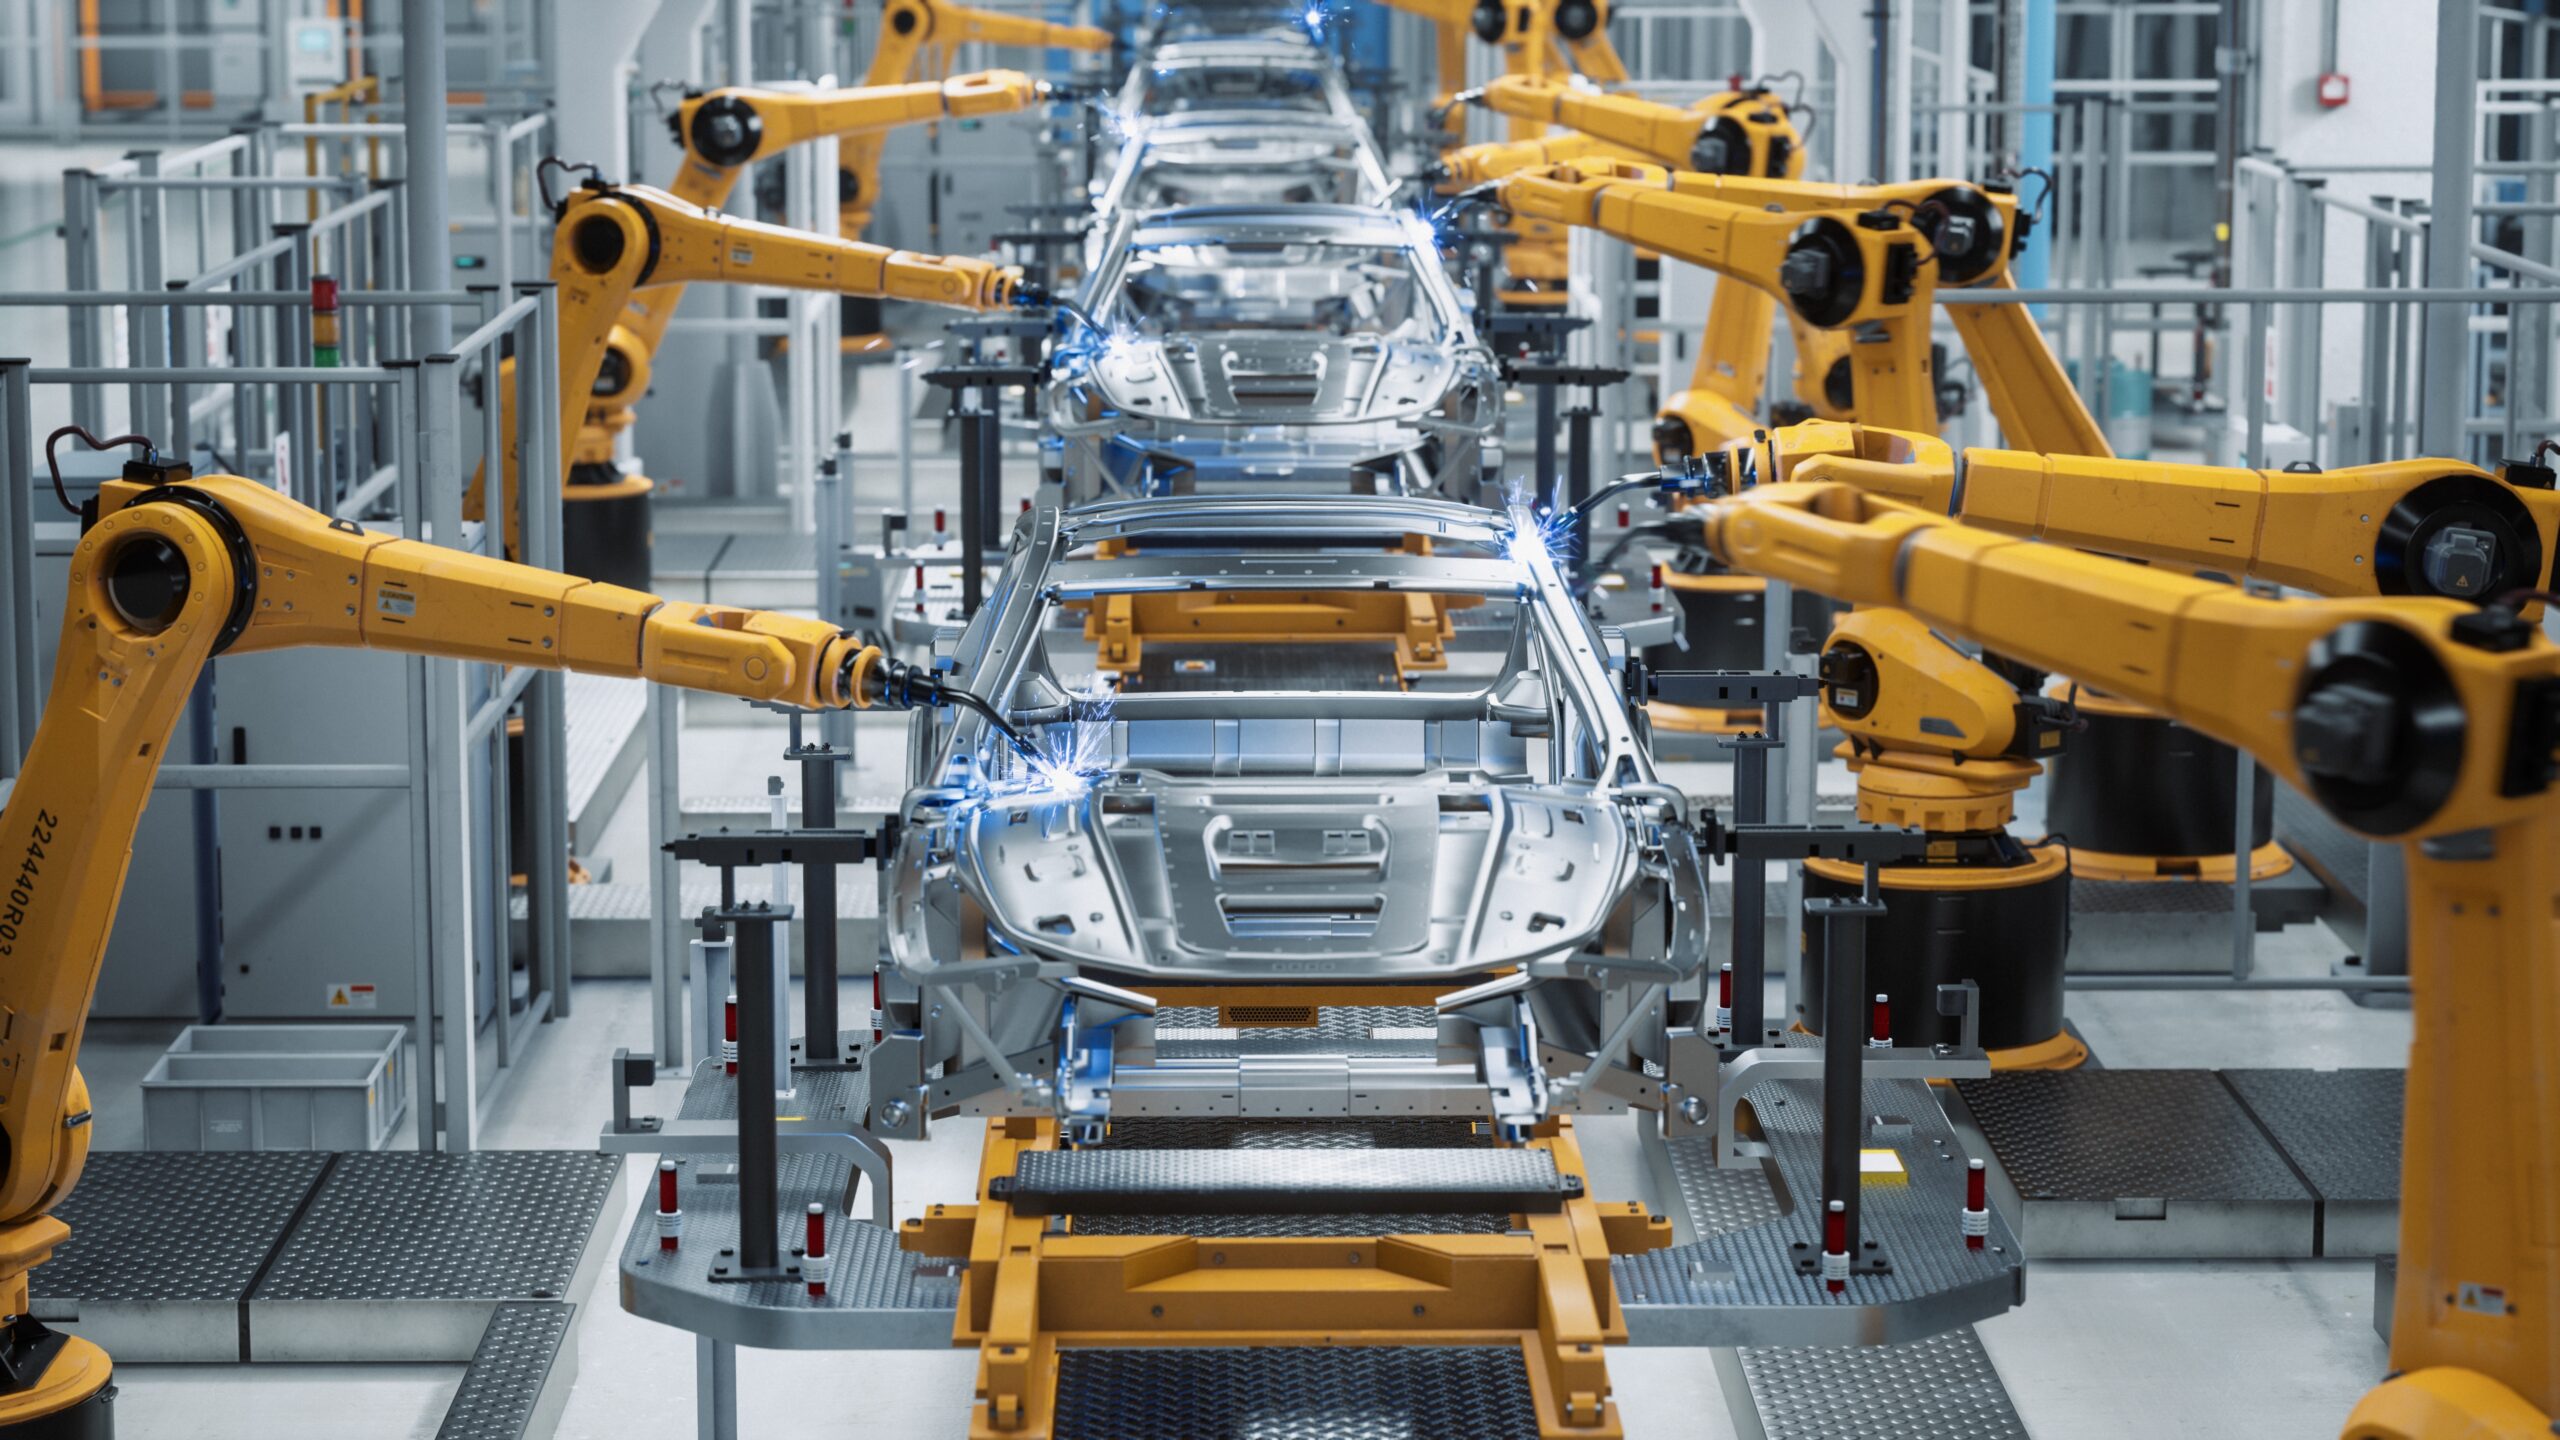 An automotive production line with robotic arms working on car frames.